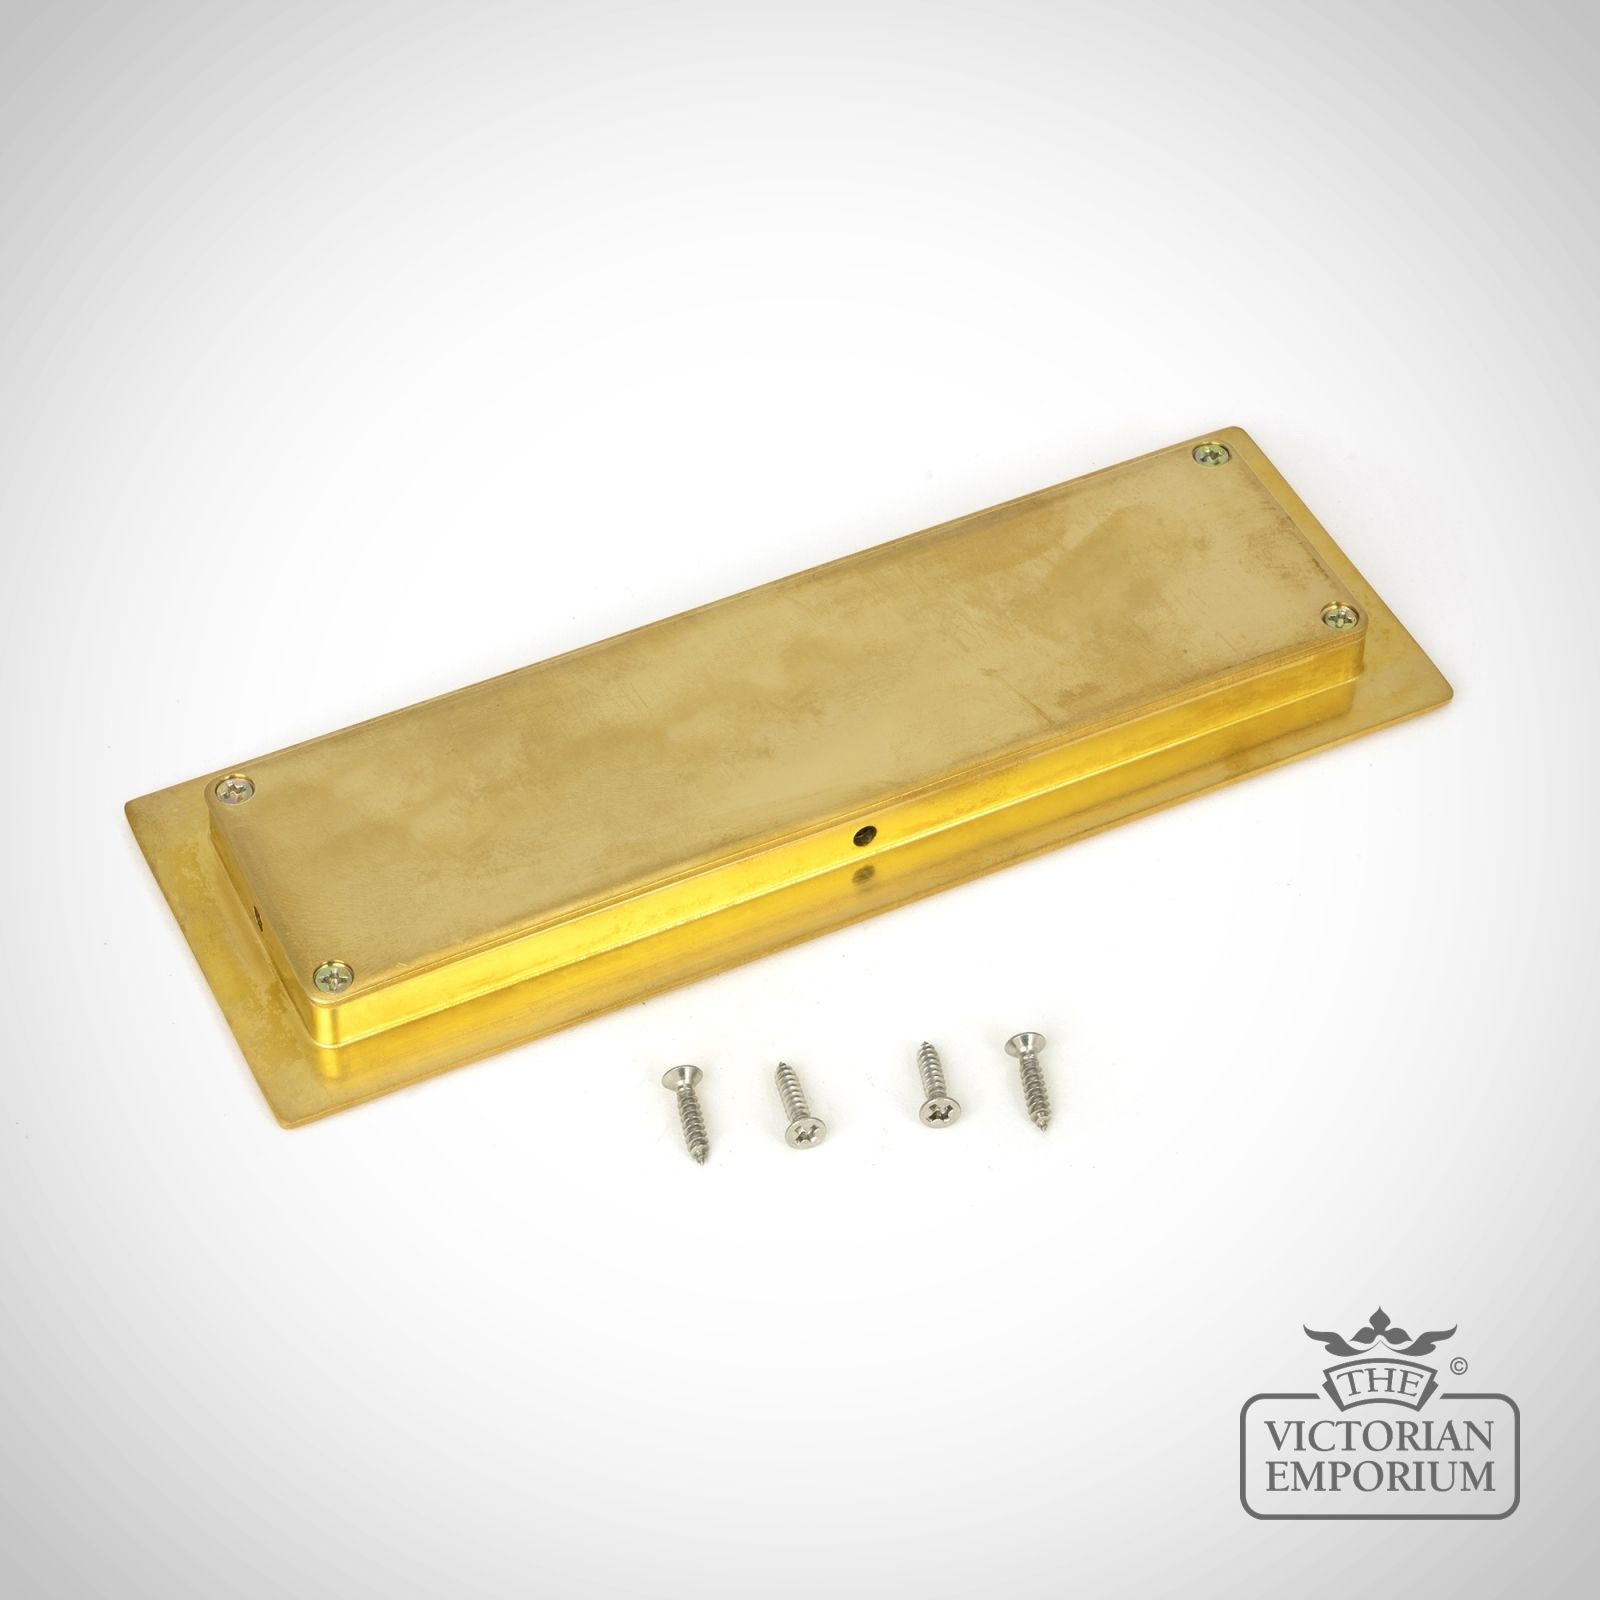 Polished Brass Art Deco Rectangular Pull for Sliding Doors in a choice of two sizes